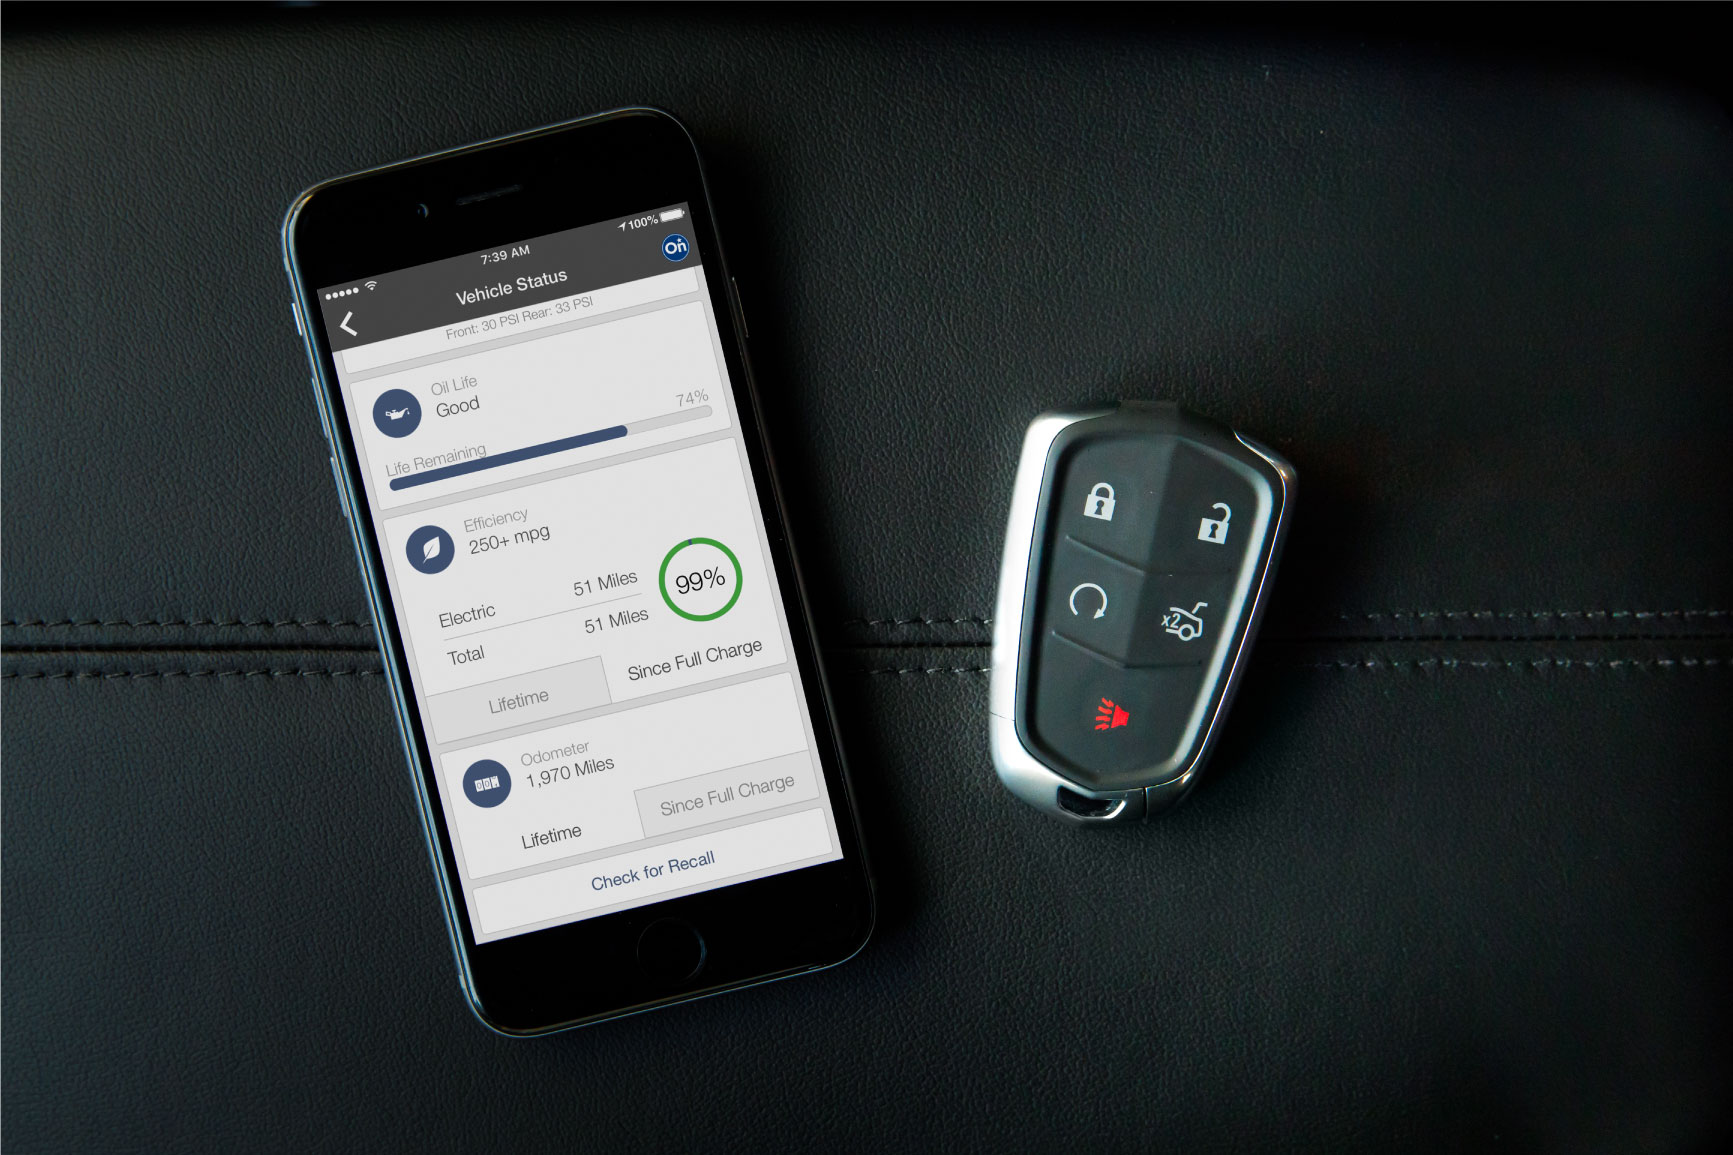 The car and phone has never had so much connectivity. The MyCadillac App offers convenient and seamless control of your vehicle from anywhere.